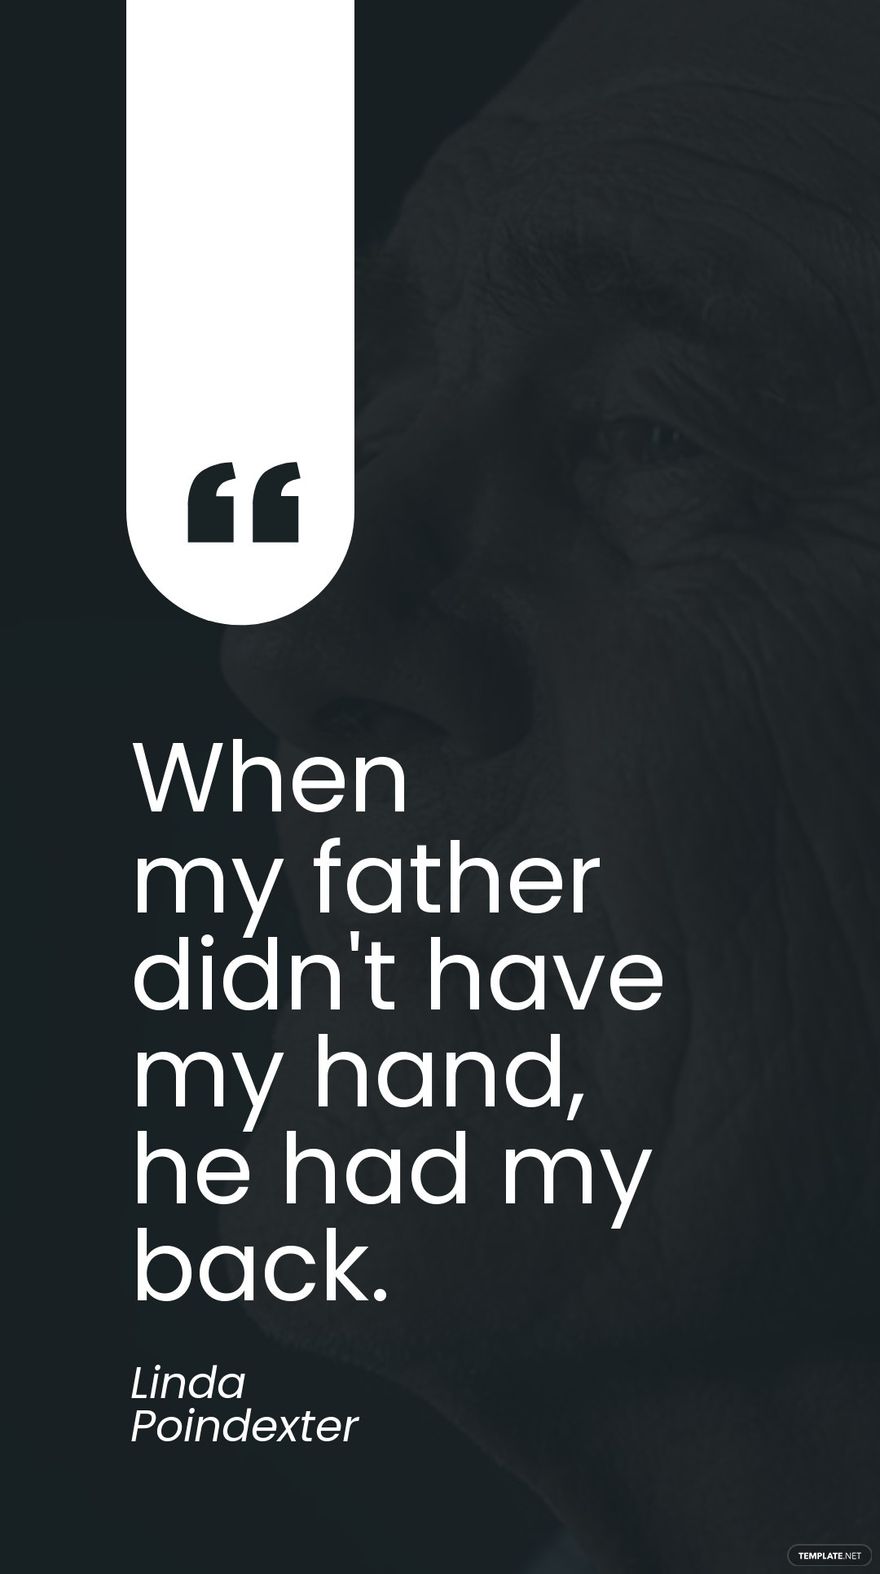 Linda Poindexter - When my father didn't have my hand, he had my back.